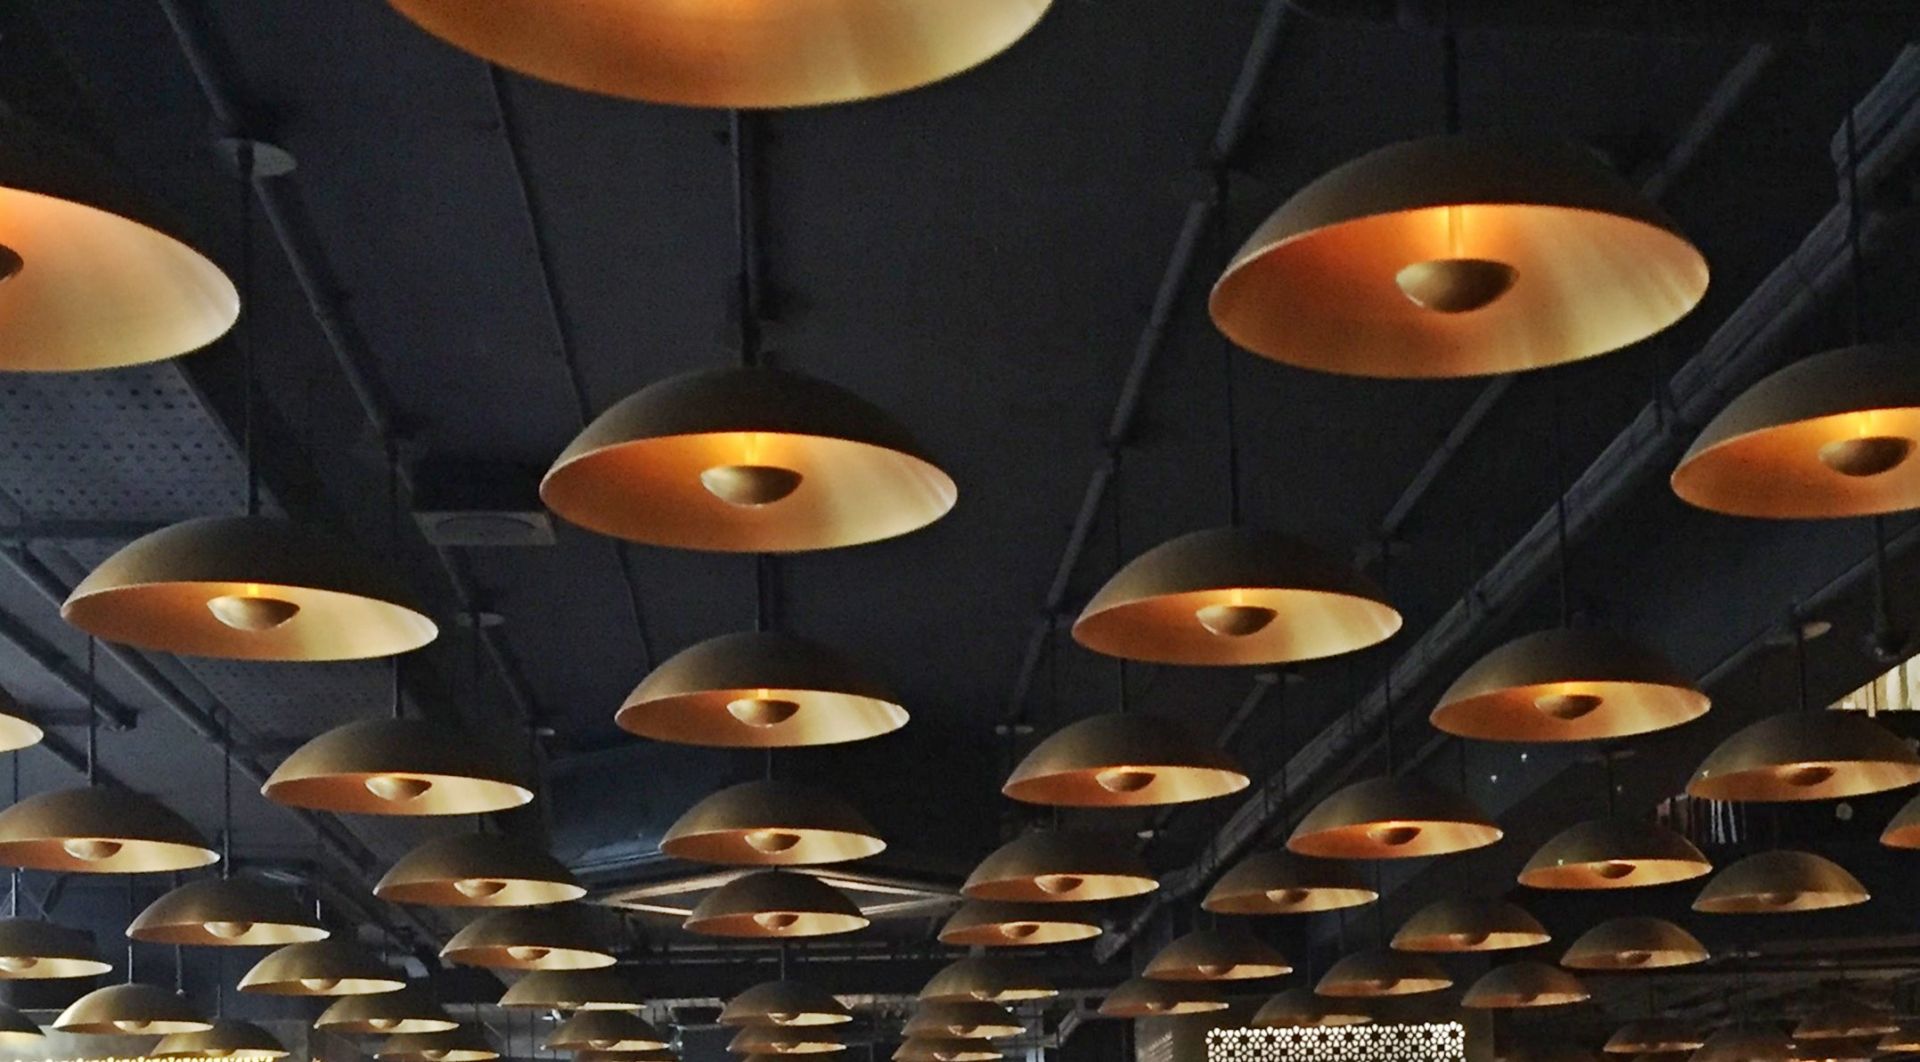 12 x Brass Effect Suspended Ceiling Light Pendant - High Quality Light Fittings With Metal - Image 7 of 7